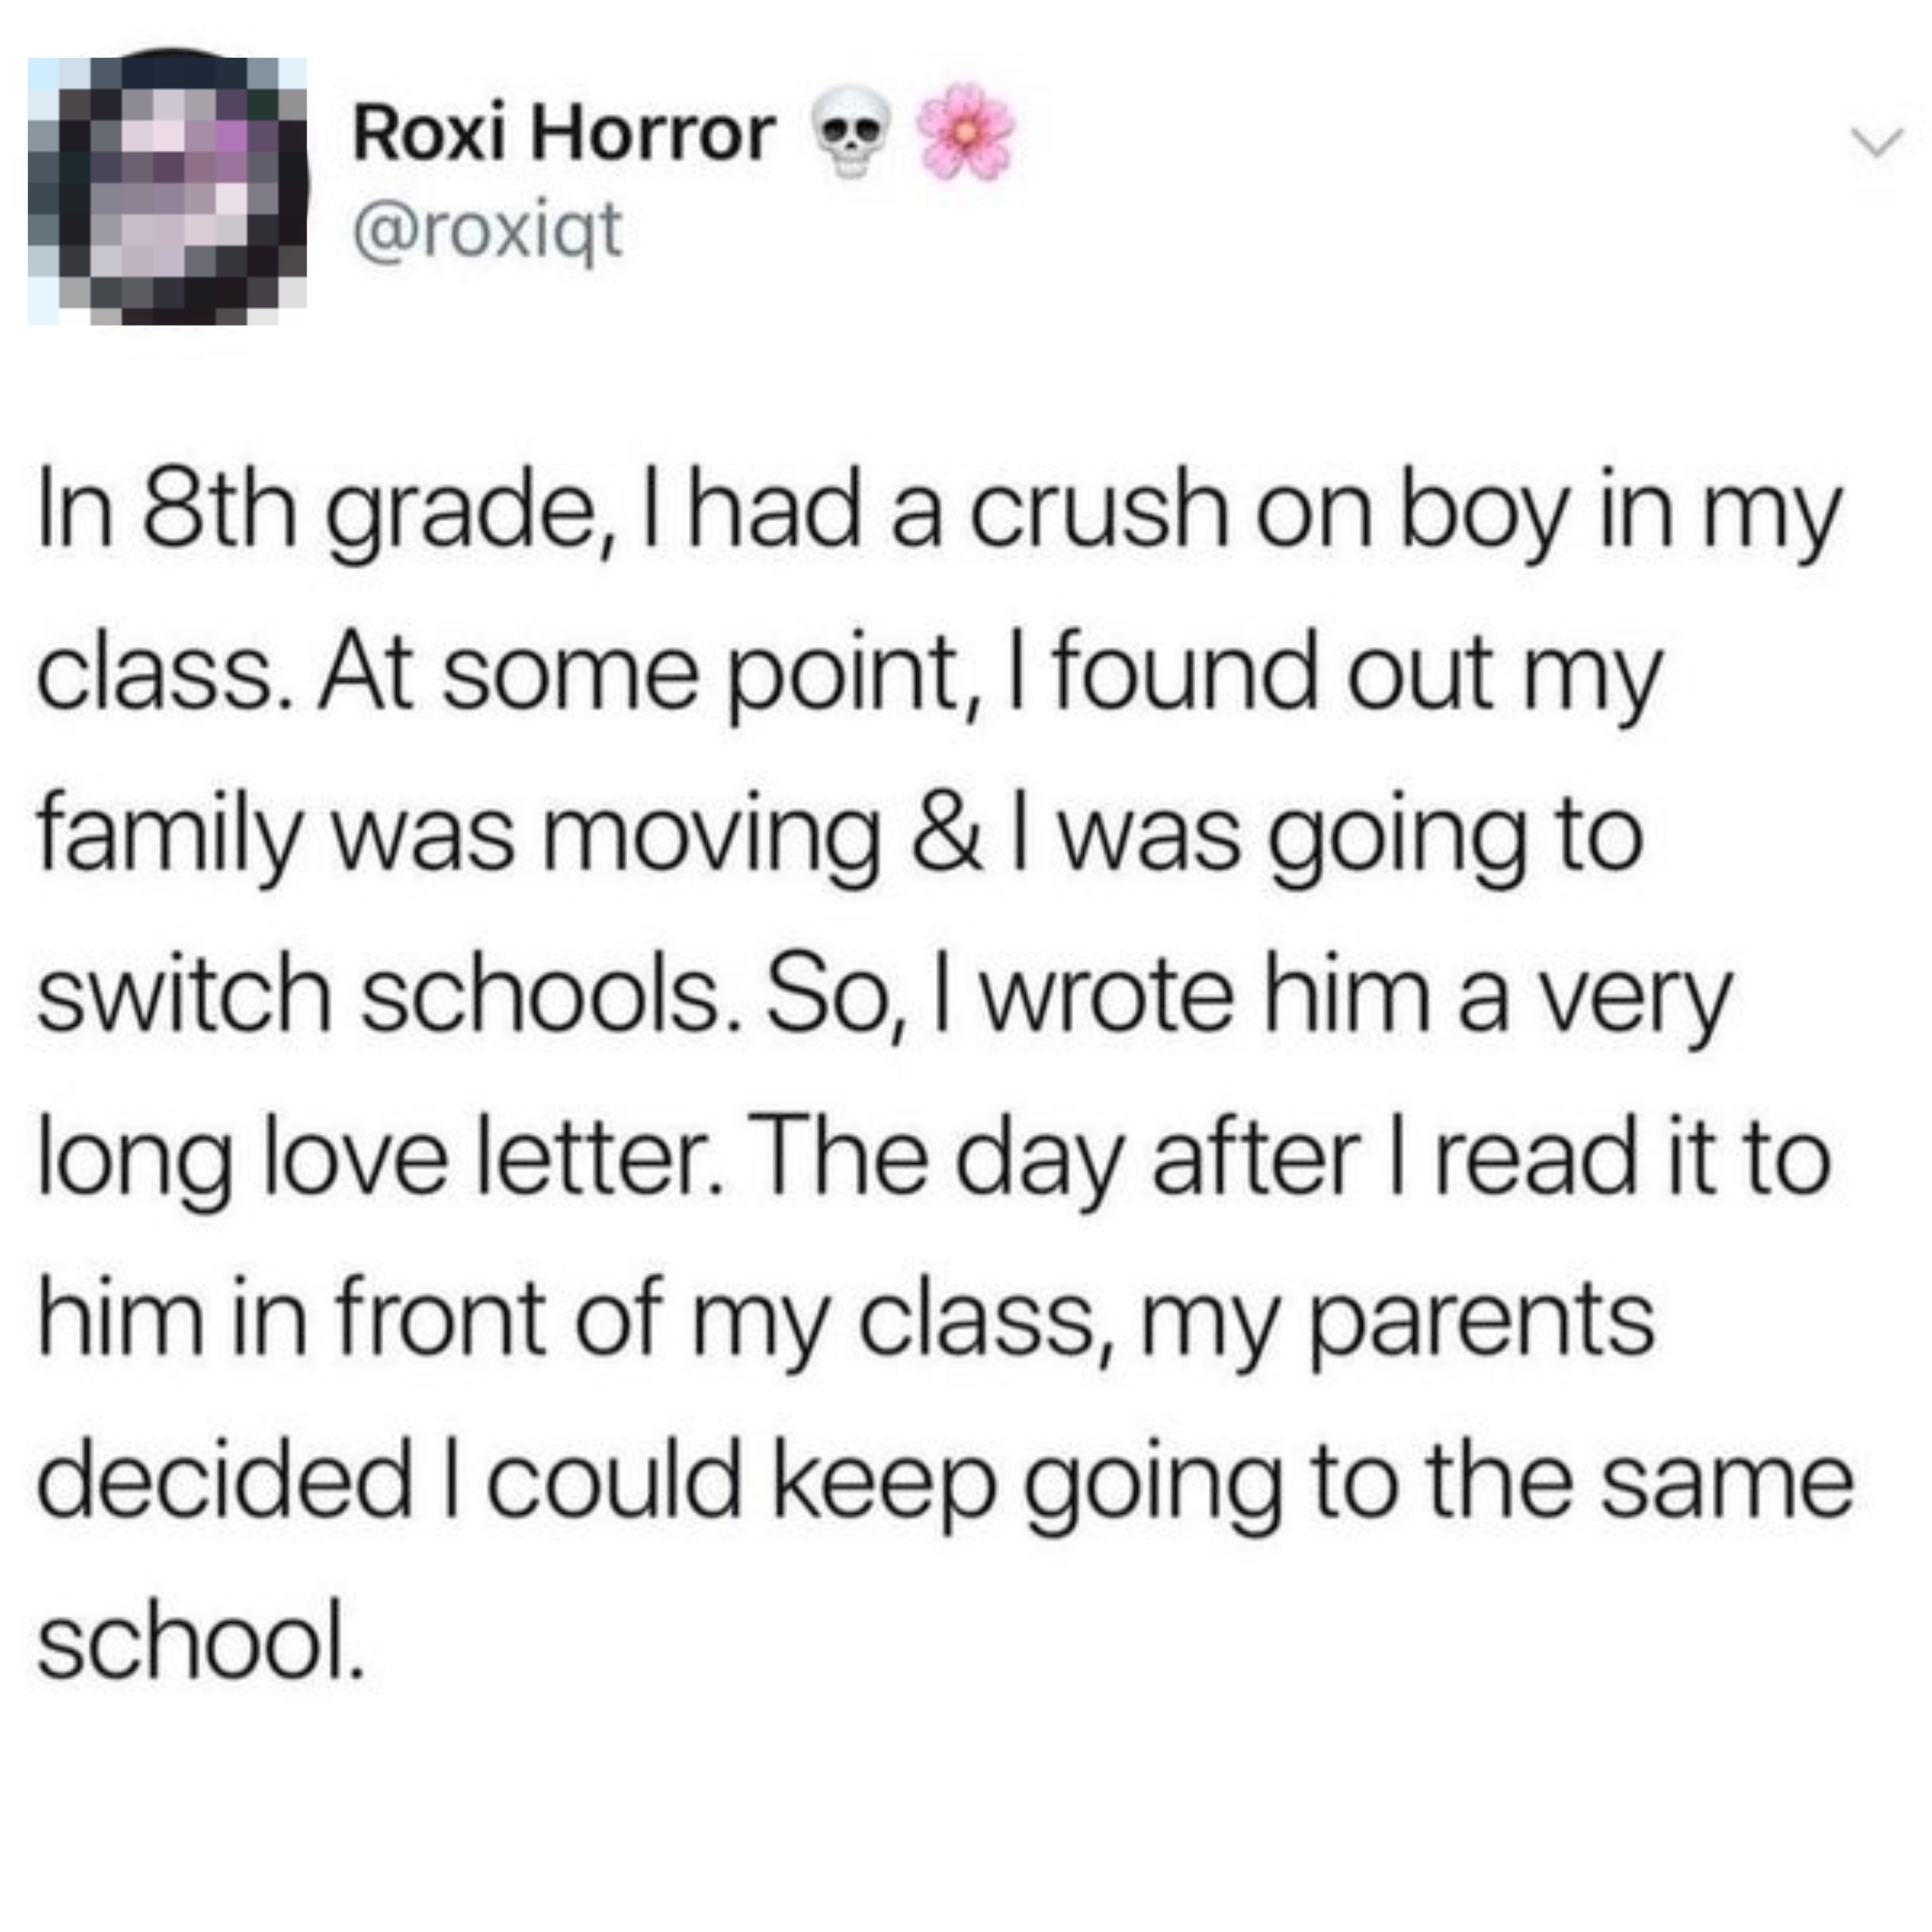 Tweet by user @roxiqrorr sharing a personal story about writing a long love letter to a crush in 8th grade and reading it to him